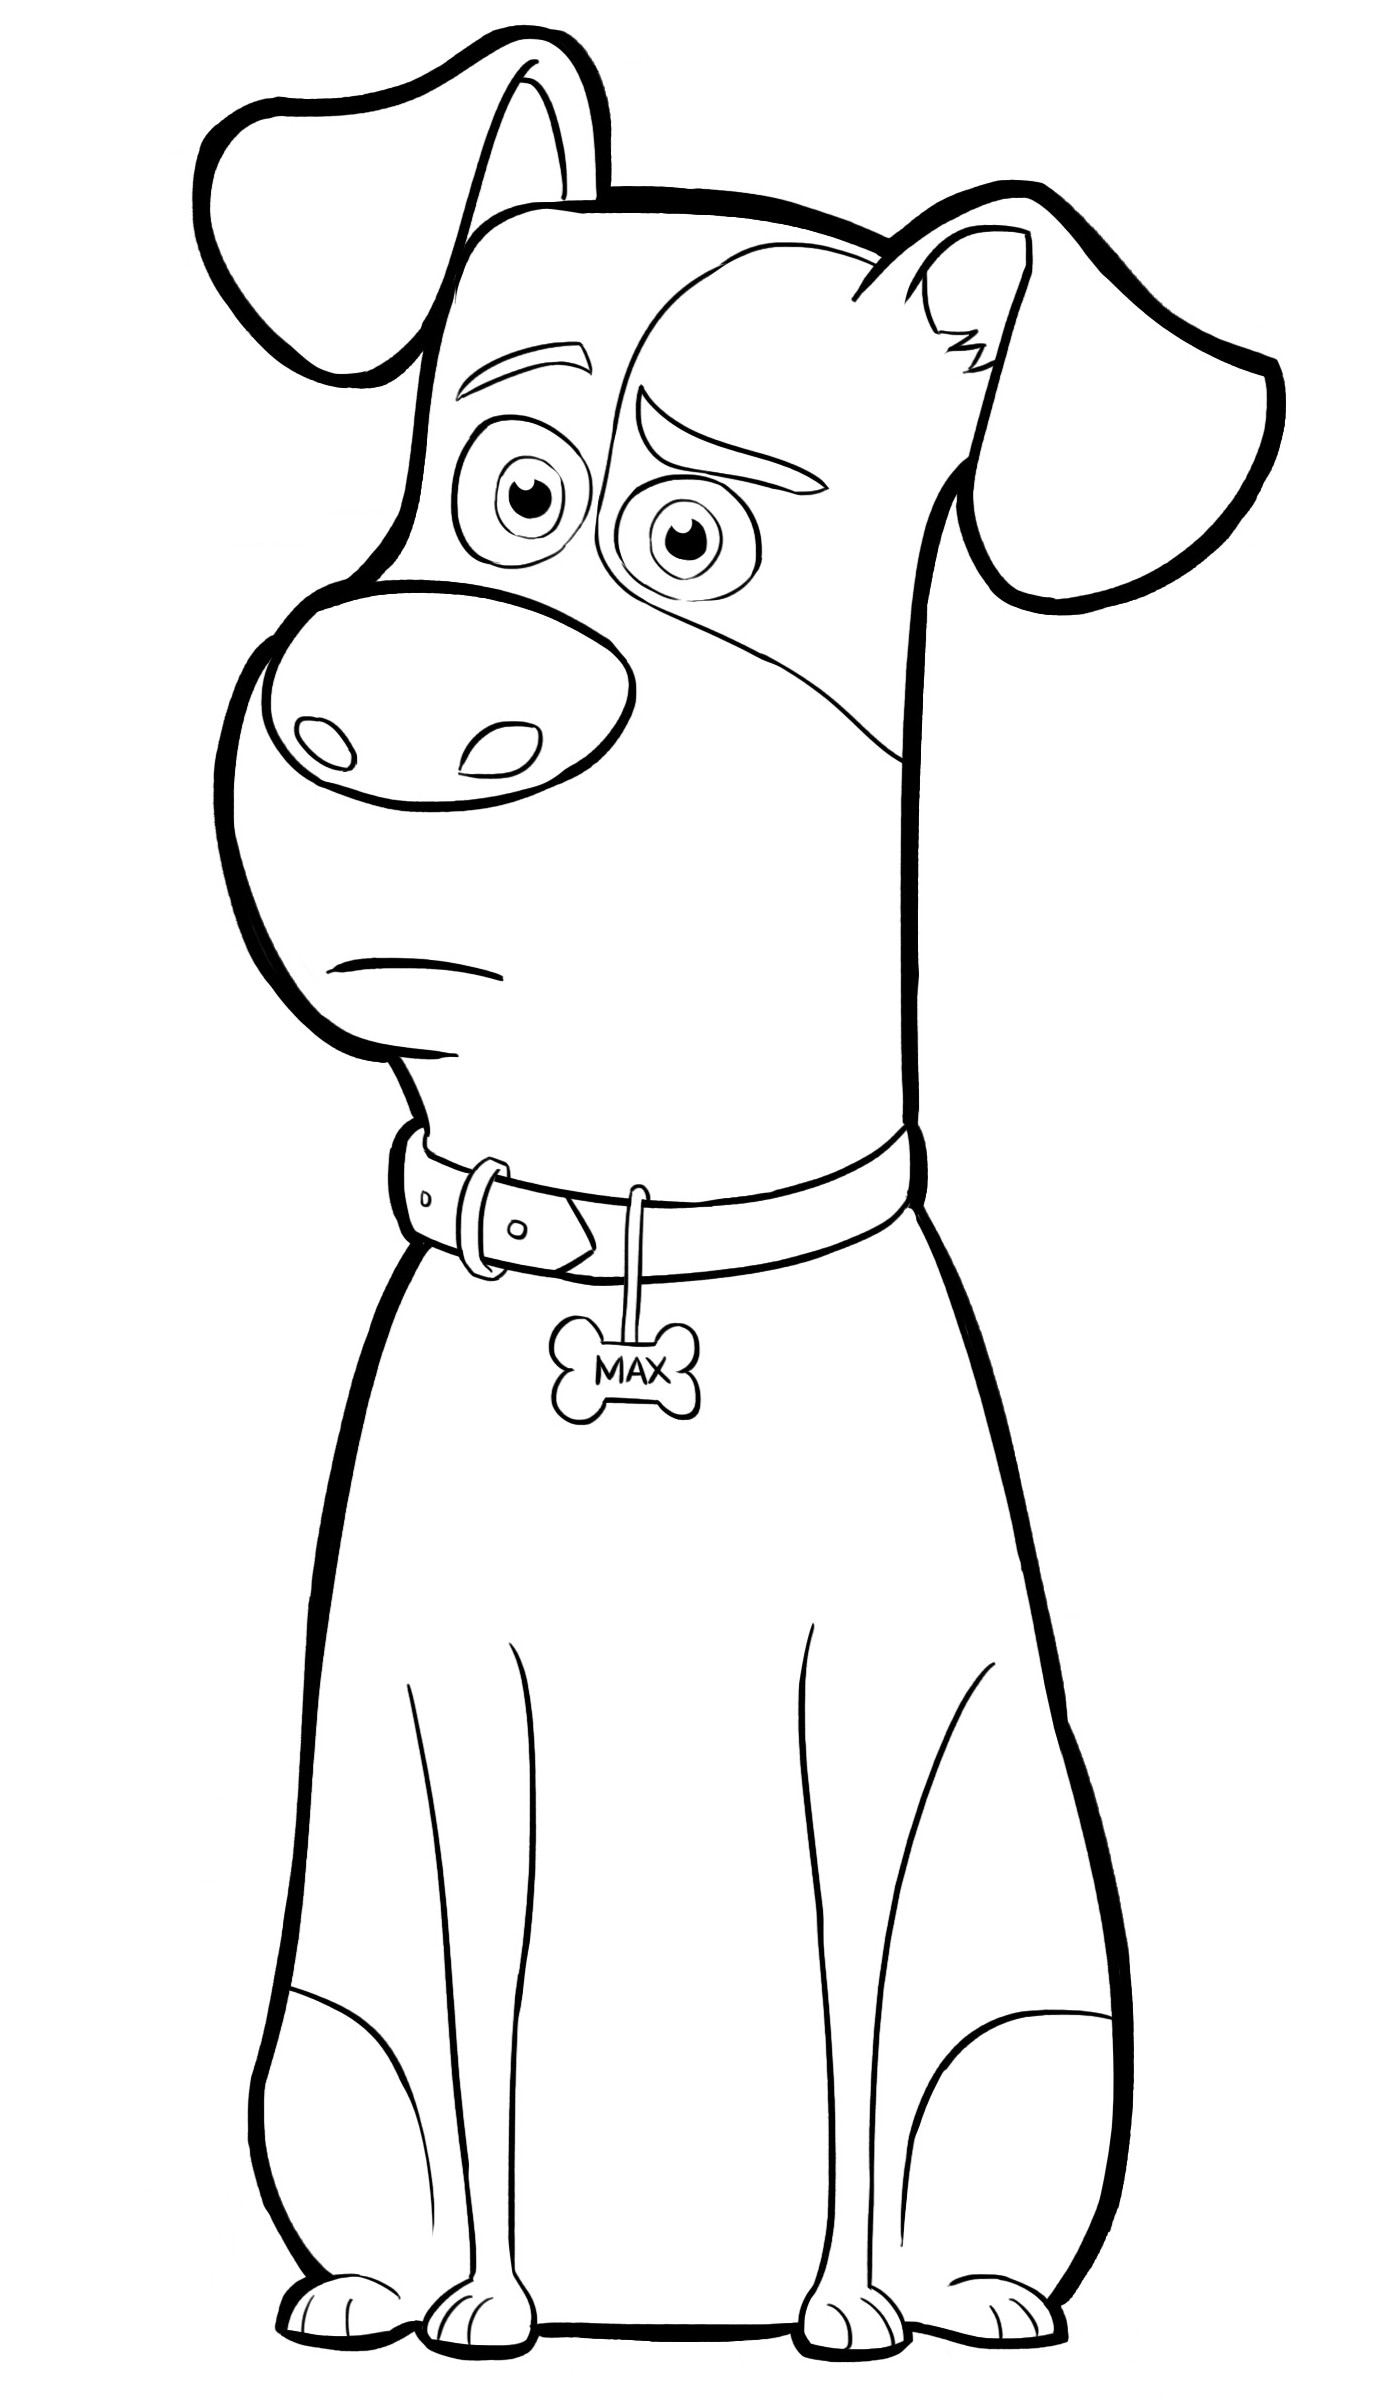 Printable Coloring Books For Kids
 Pets Coloring Pages Best Coloring Pages For Kids